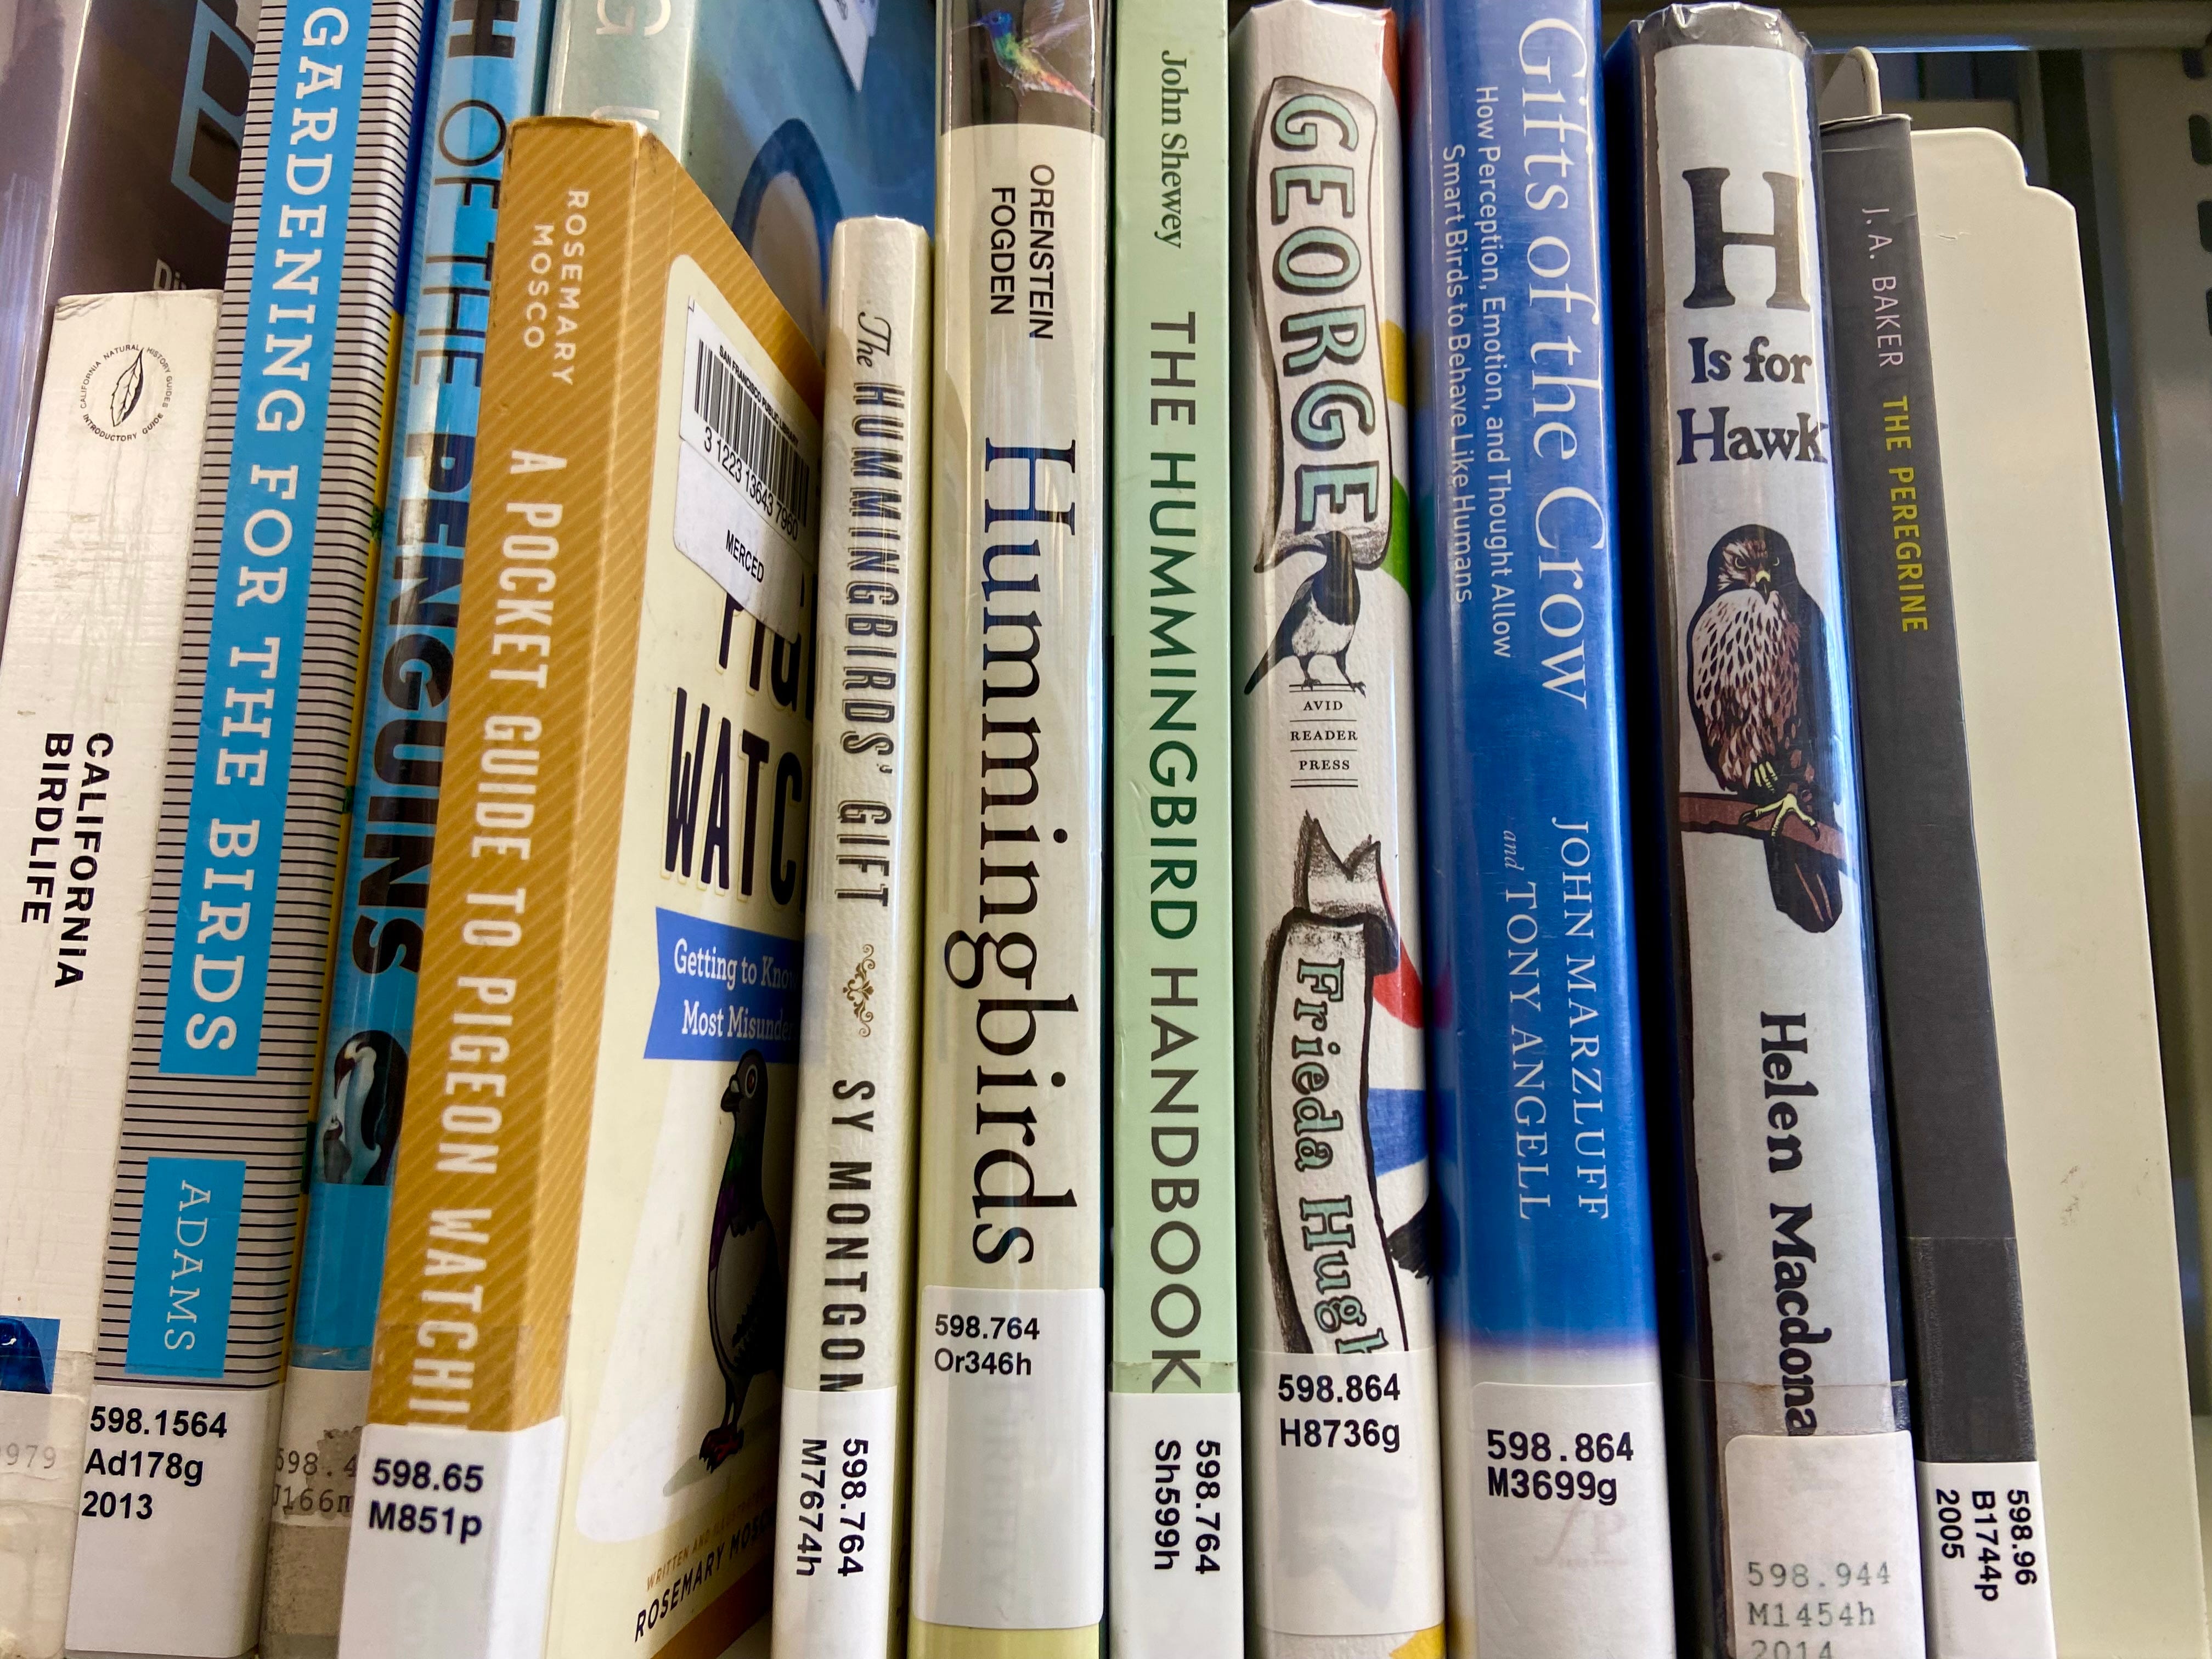 Books on the shelf at the library; pigeon book